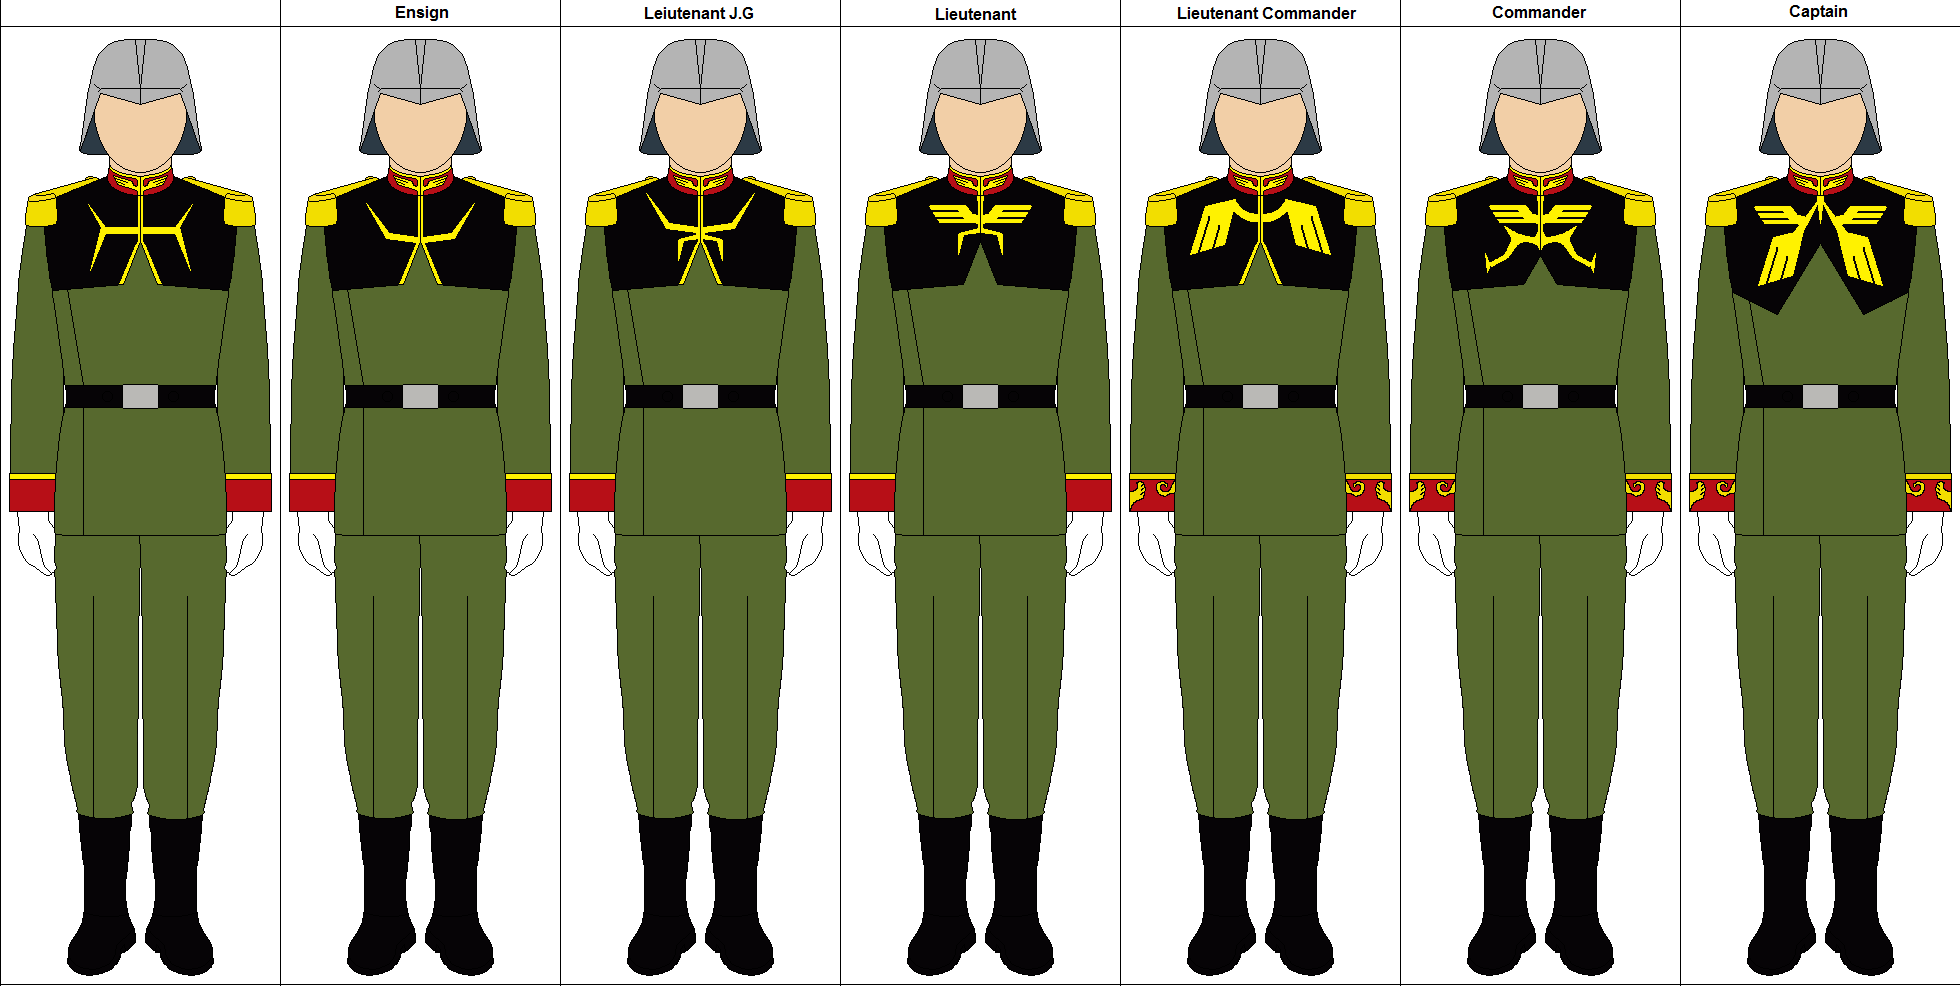 Zeon Uniforms and Ranks by charyui on DeviantArt